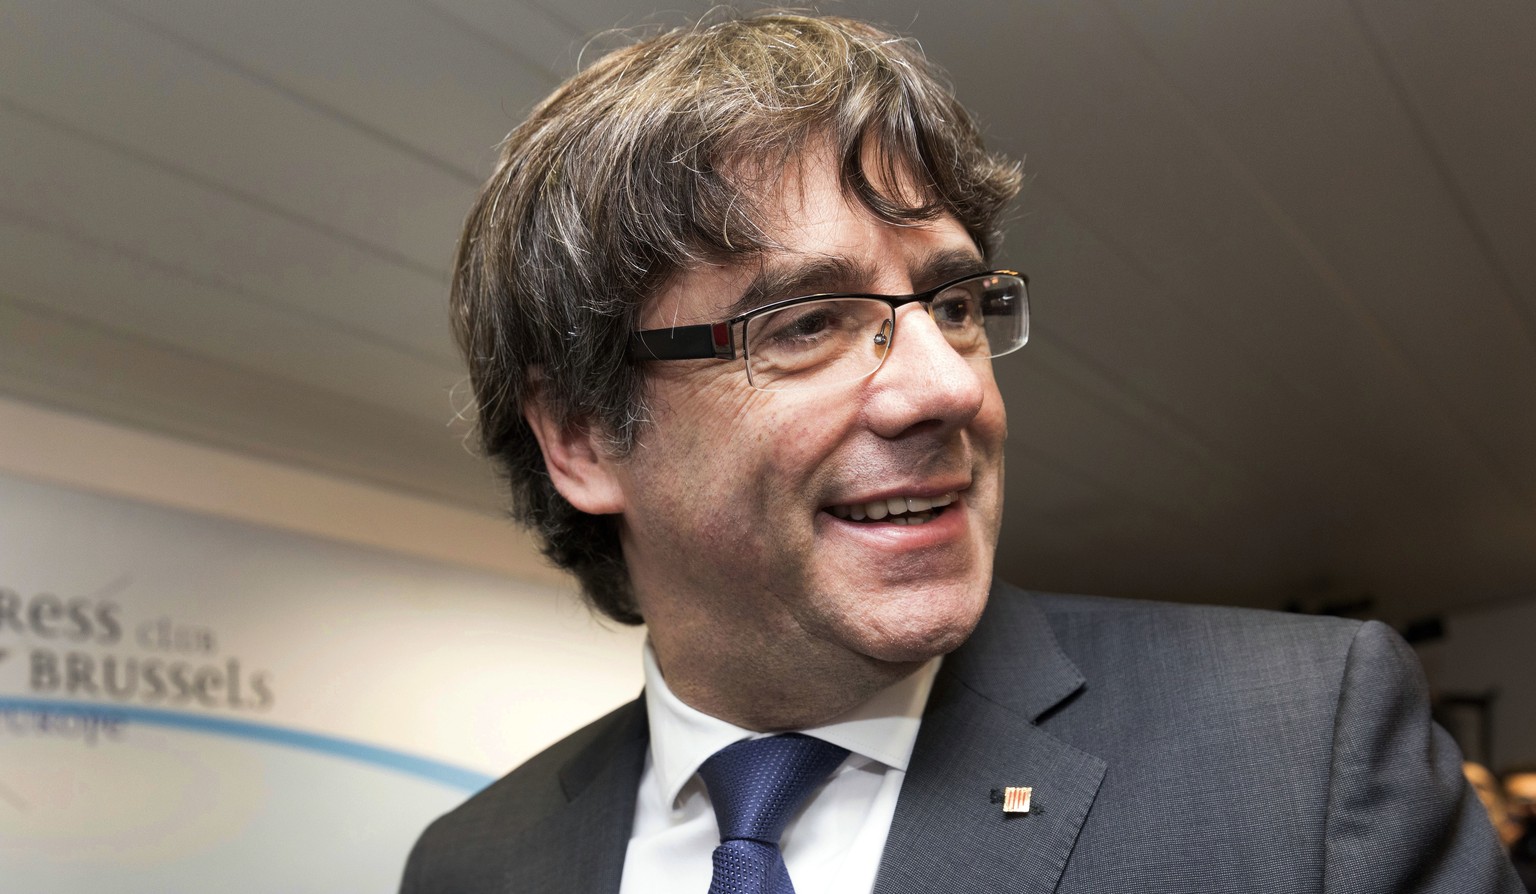 FILE - In this Tuesday, Oct. 31, 2017 file photo, ousted Catalan President Carles Puigdemont smiles after a press conference in Brussels. Puigdemont says he is ready to run for re-election in December ...